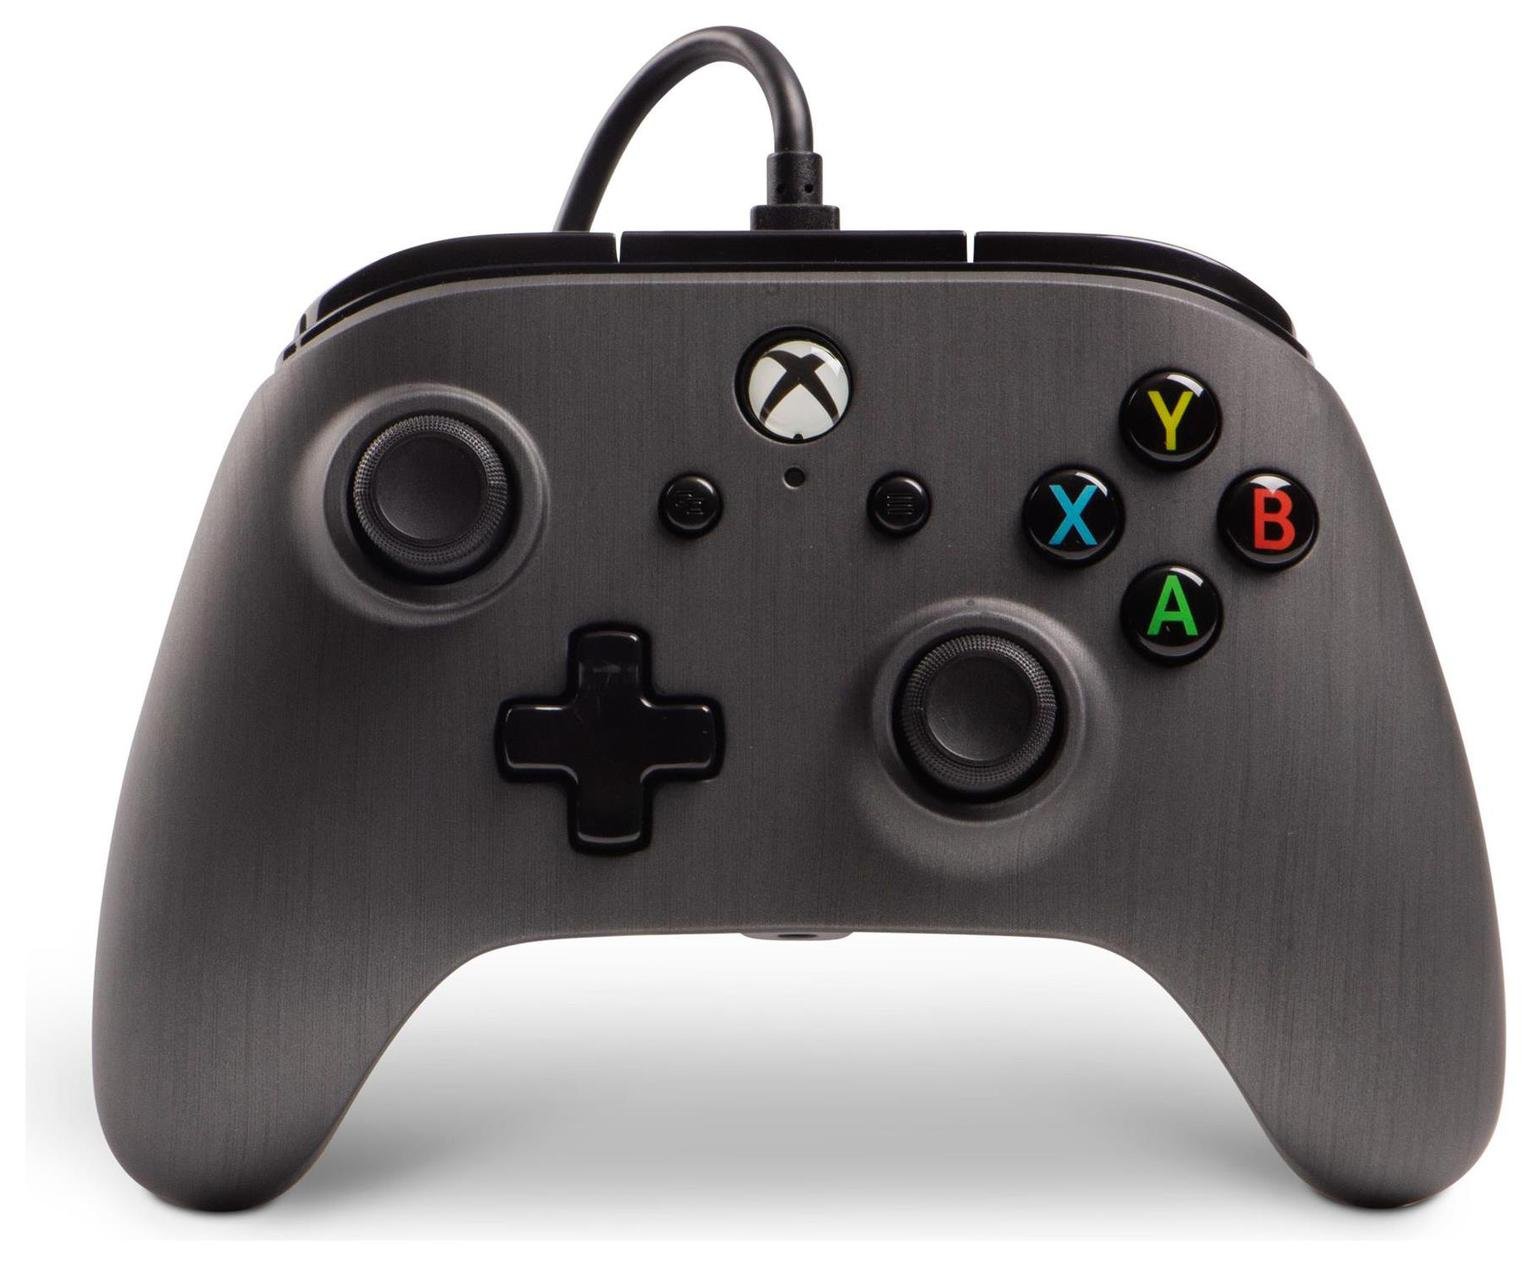 Enhanced Wired Controller for Xbox One - Brushed Gunmetal